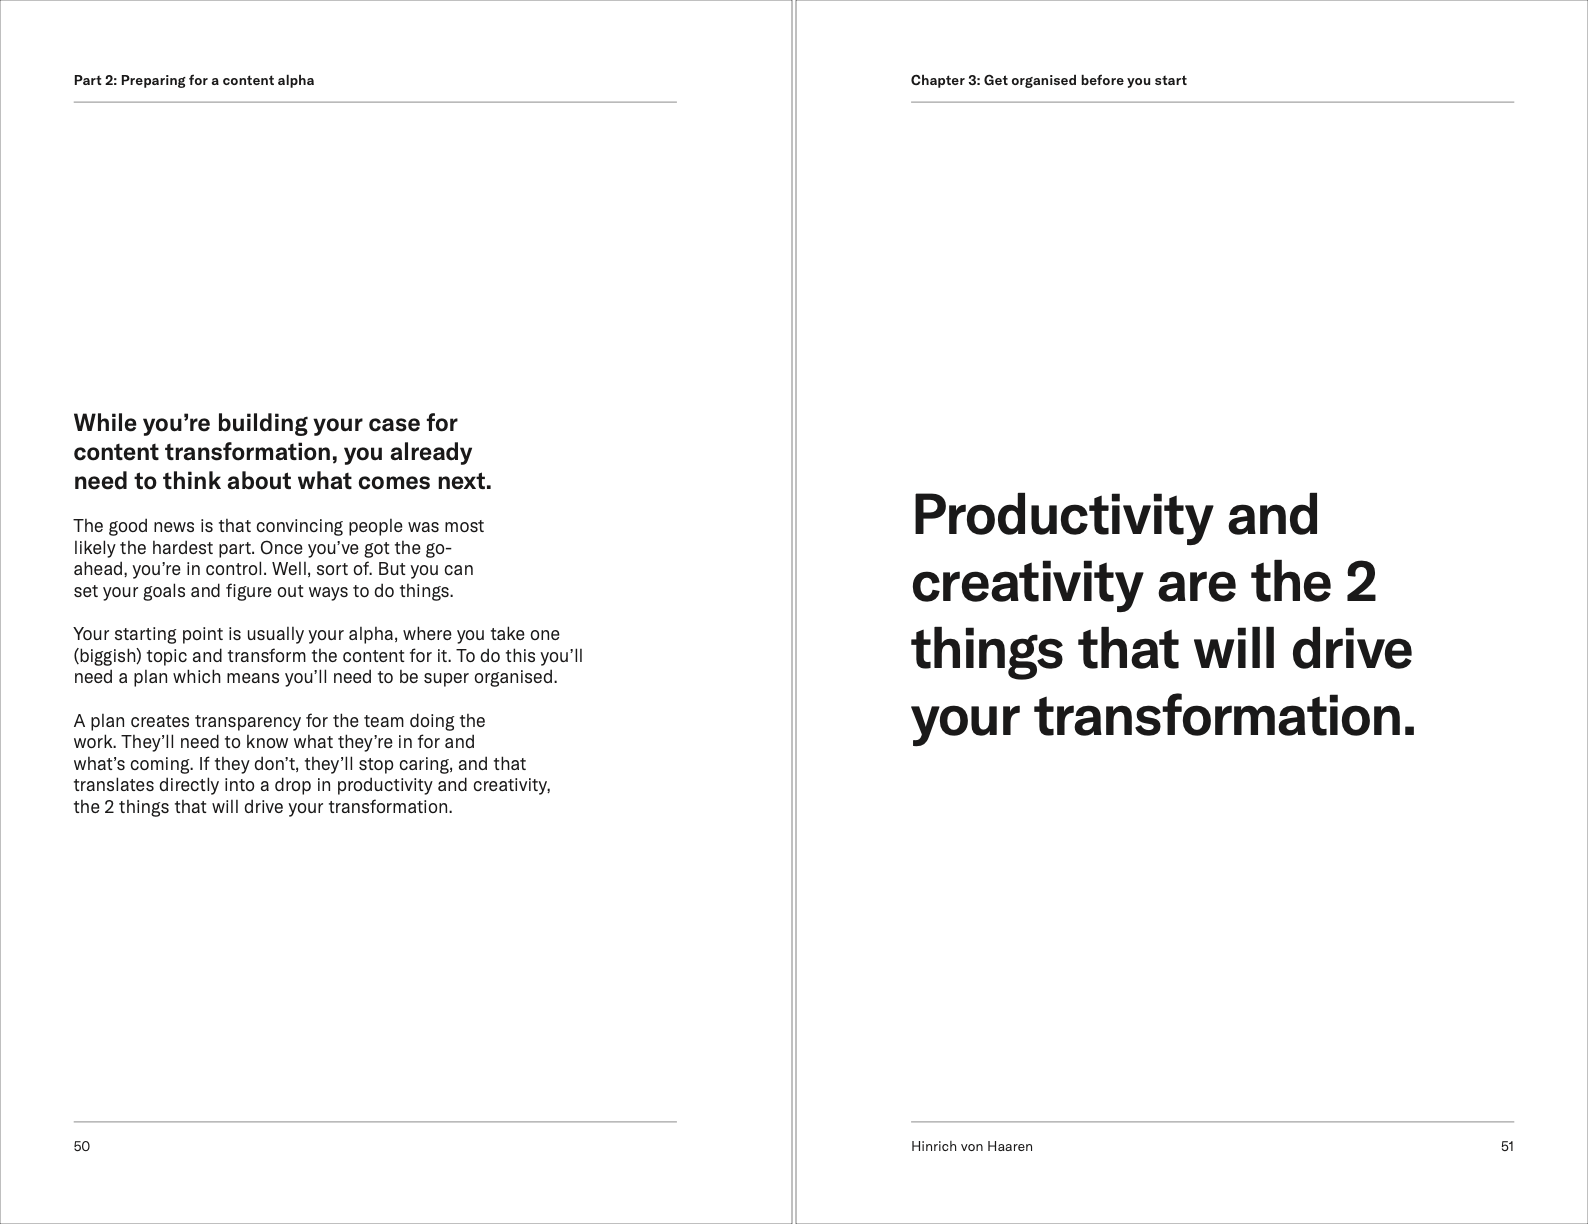 A photo of a page from Content transformation by Hinrich von Haaren